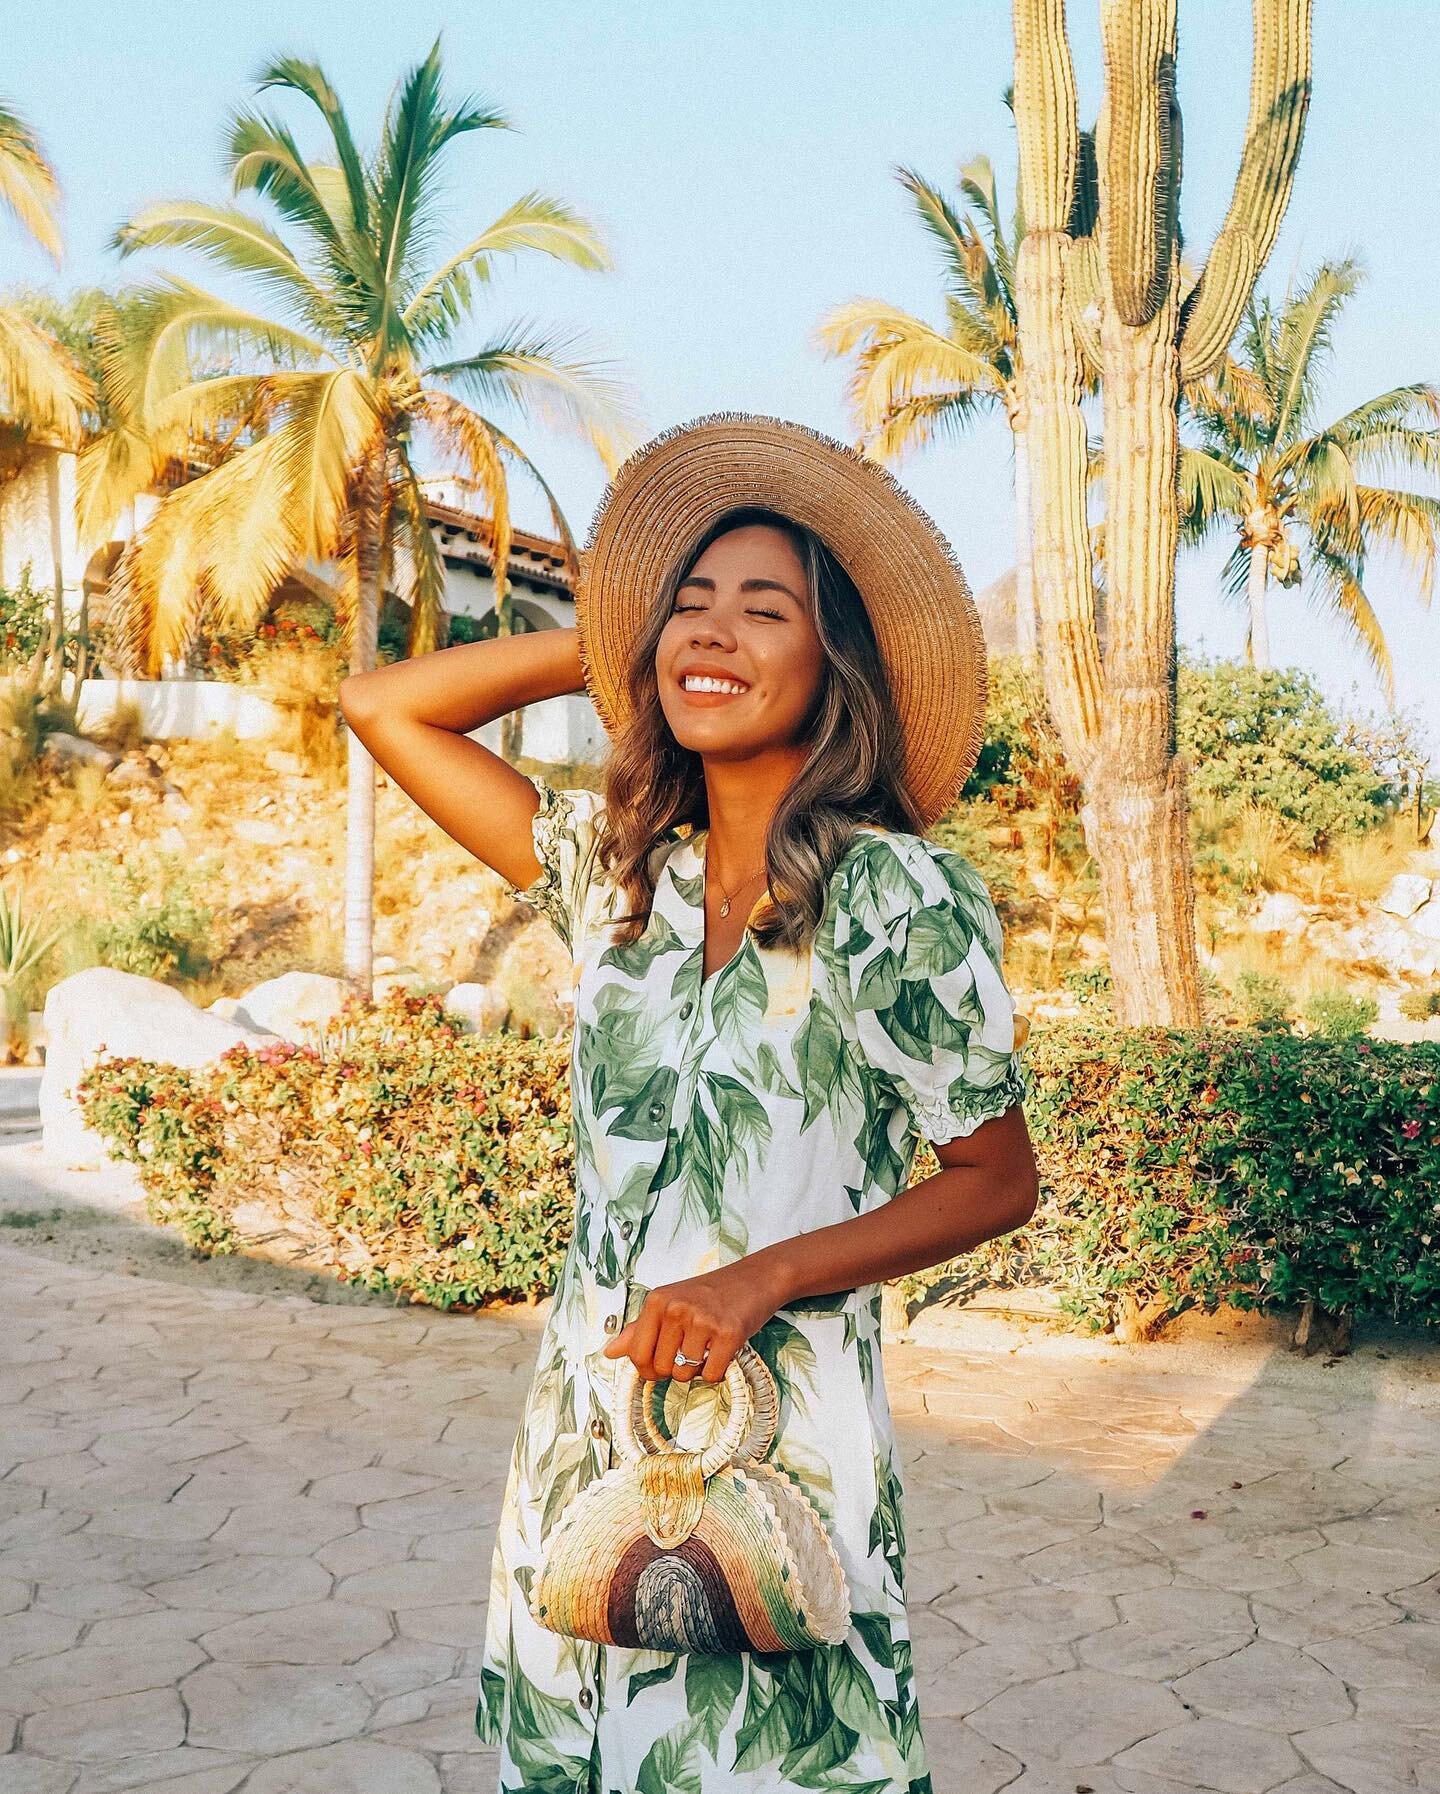 Wondering what to wear on your next tropical vacation? 🌴💛🌵Packing easy to throw-on clothes means less time spent getting dressed and more time for fun! 

From comfortable sightseeing looks to resort-style outfits, check out 6 ready-to-go vacation 